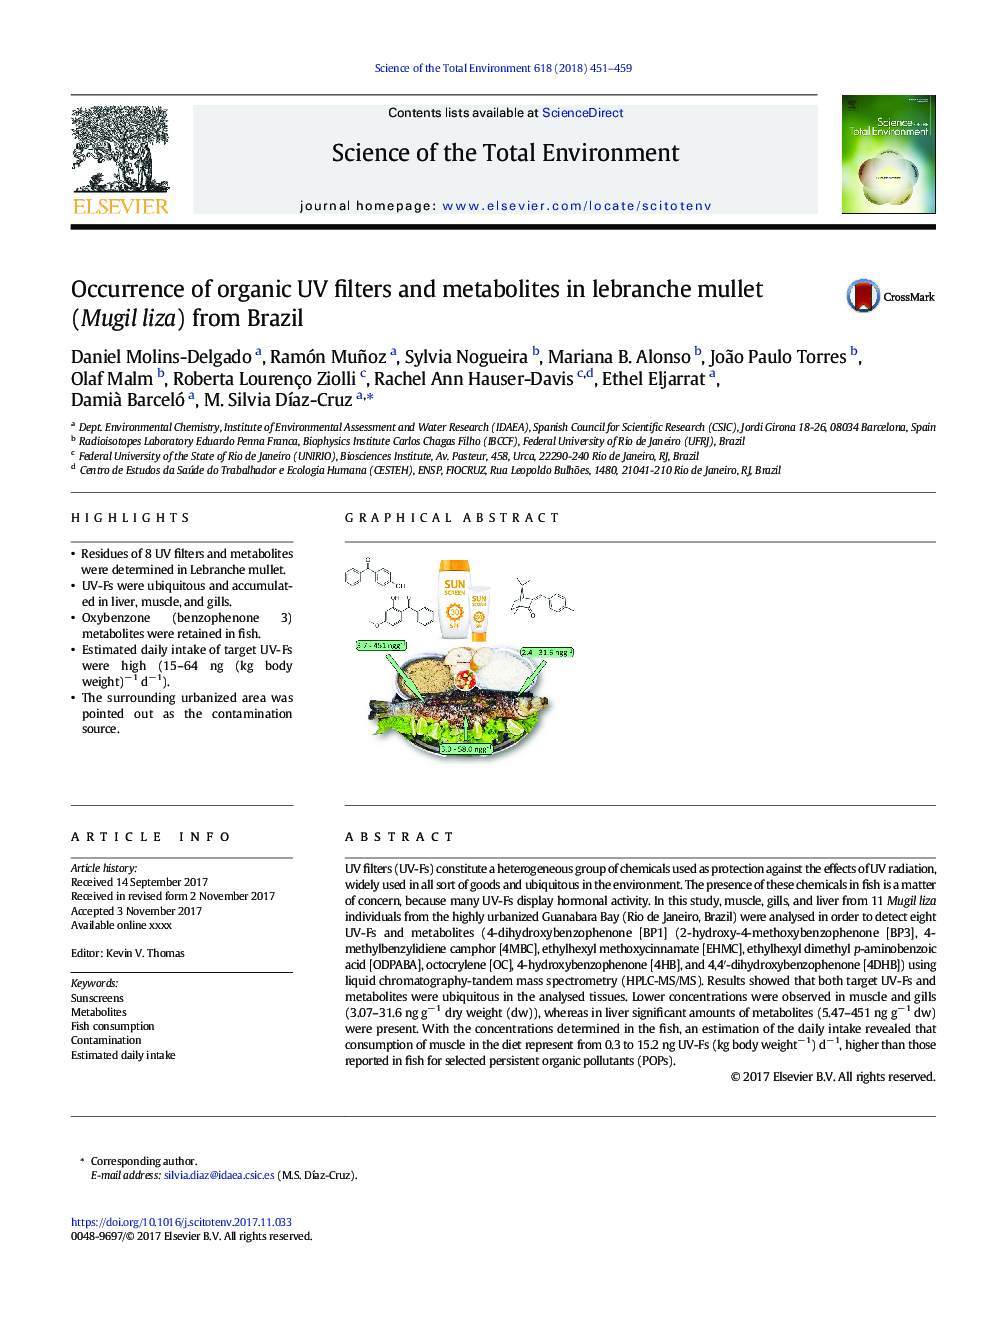 Occurrence of organic UV filters and metabolites in lebranche mullet (Mugil liza) from Brazil